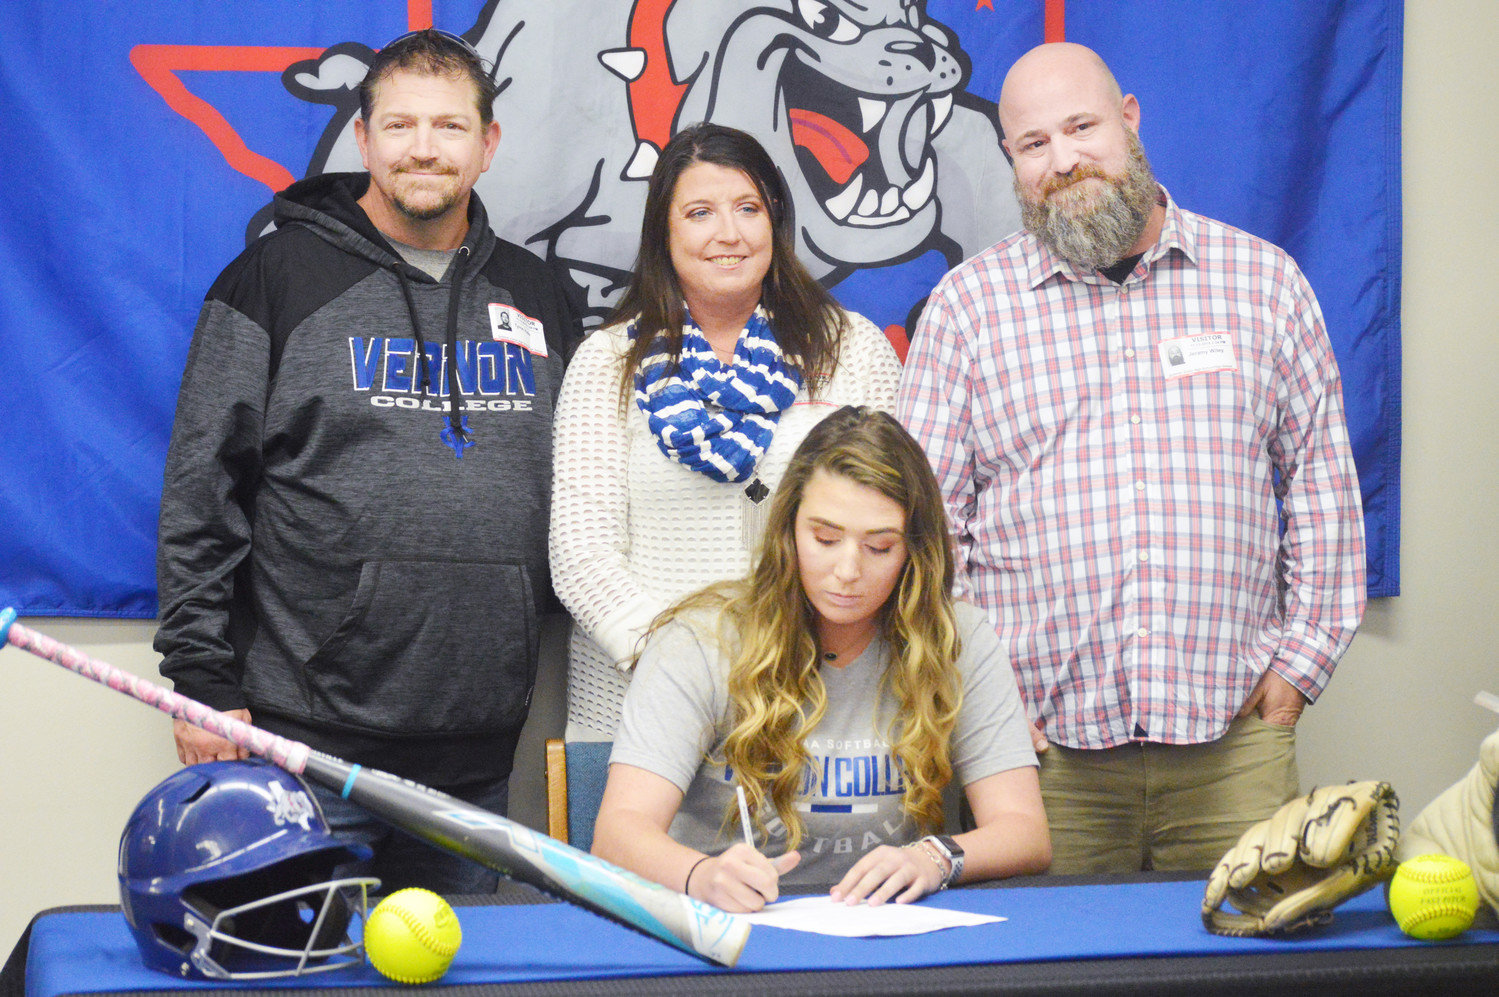 Quitman High School softball star Kendal Wiley signed a national letter of intent to play collegiately at Vernon College. She is pictured here with her parents (left to right) Tyron Hale (step-father), Haley Hale (mother) and Jeremy Wiley (father).